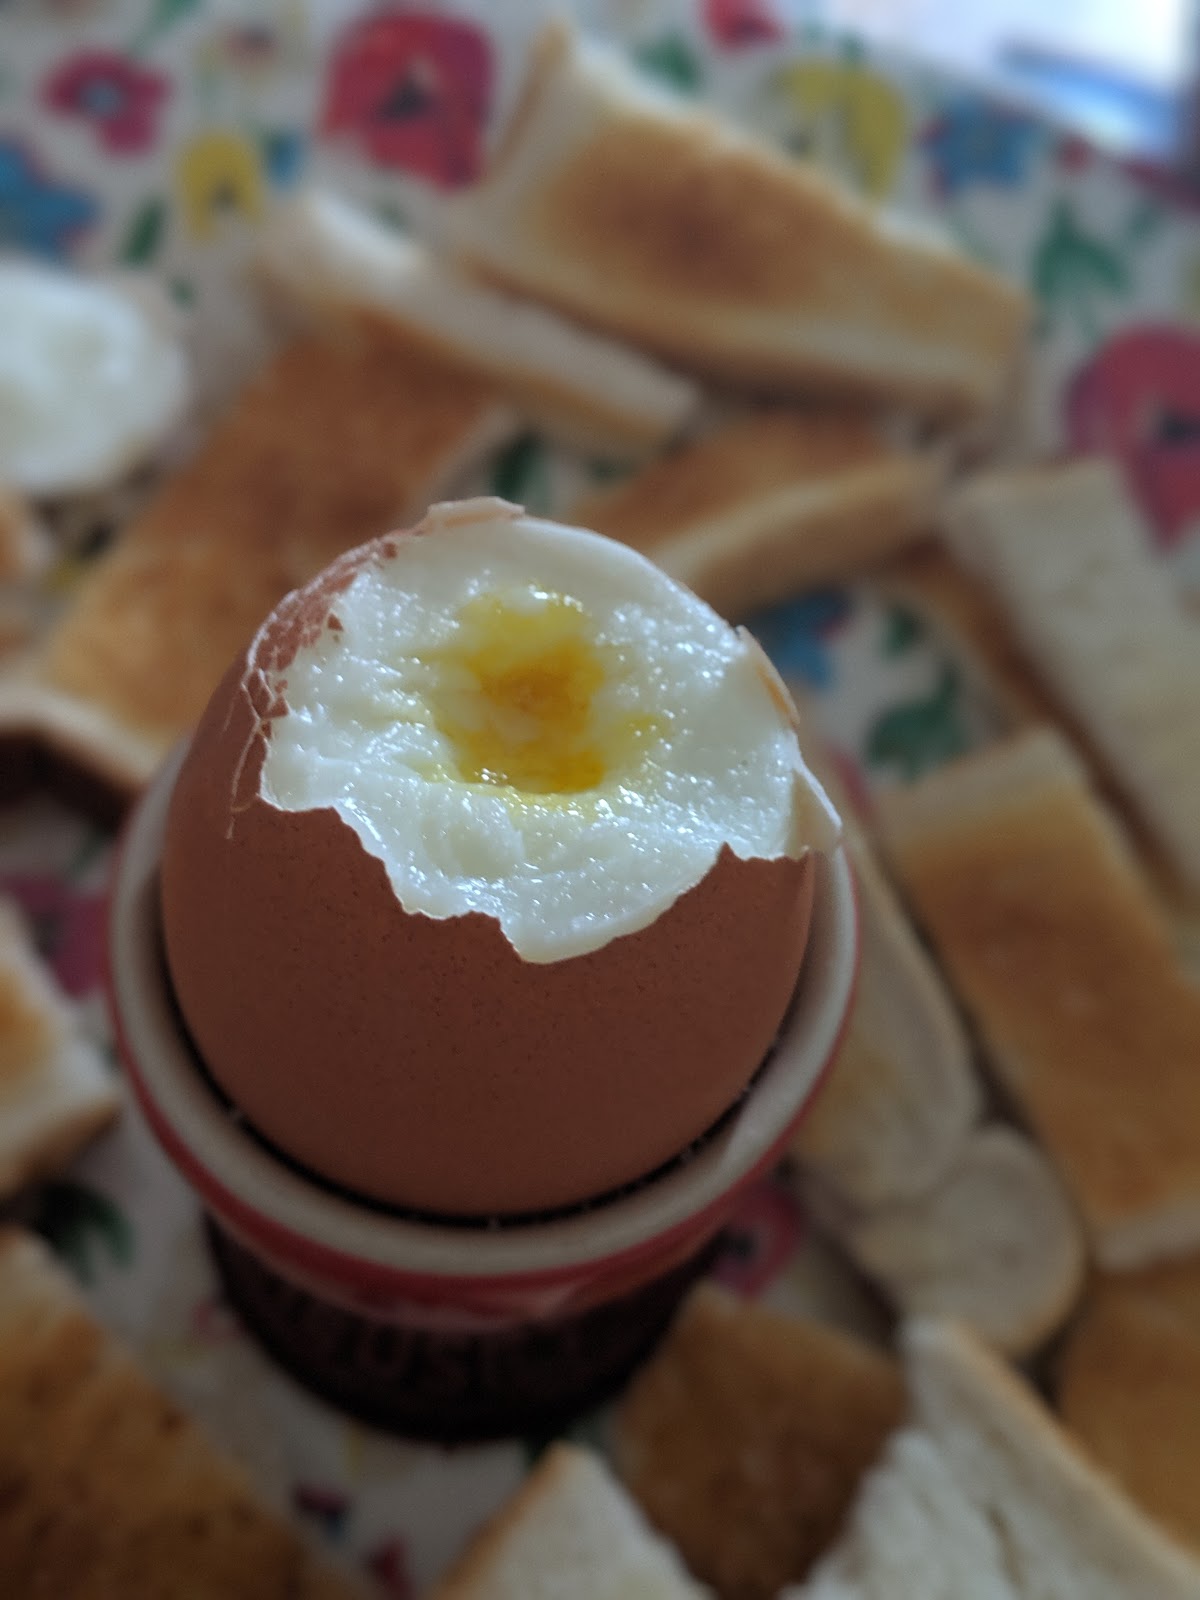 40+ Rainy Day Educational Activities for Kids Aged 9-12 - cook an egg three ways 